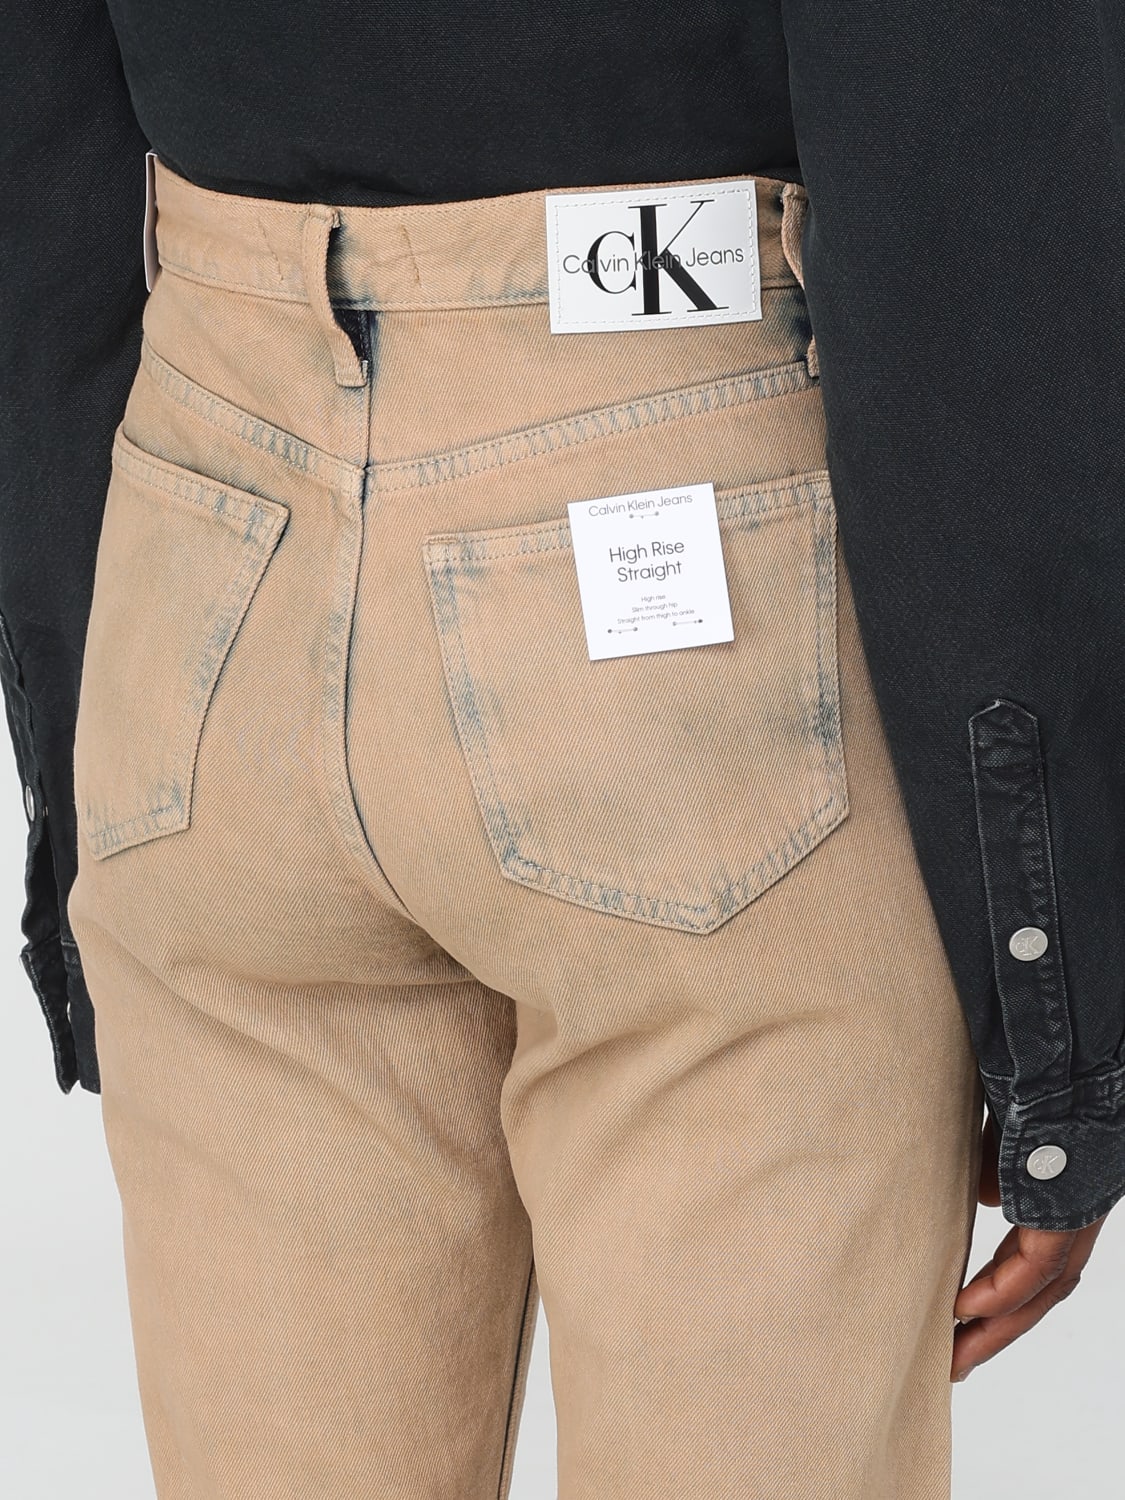 Jeans Calvin Klein Jeans High Rise Straight Pants